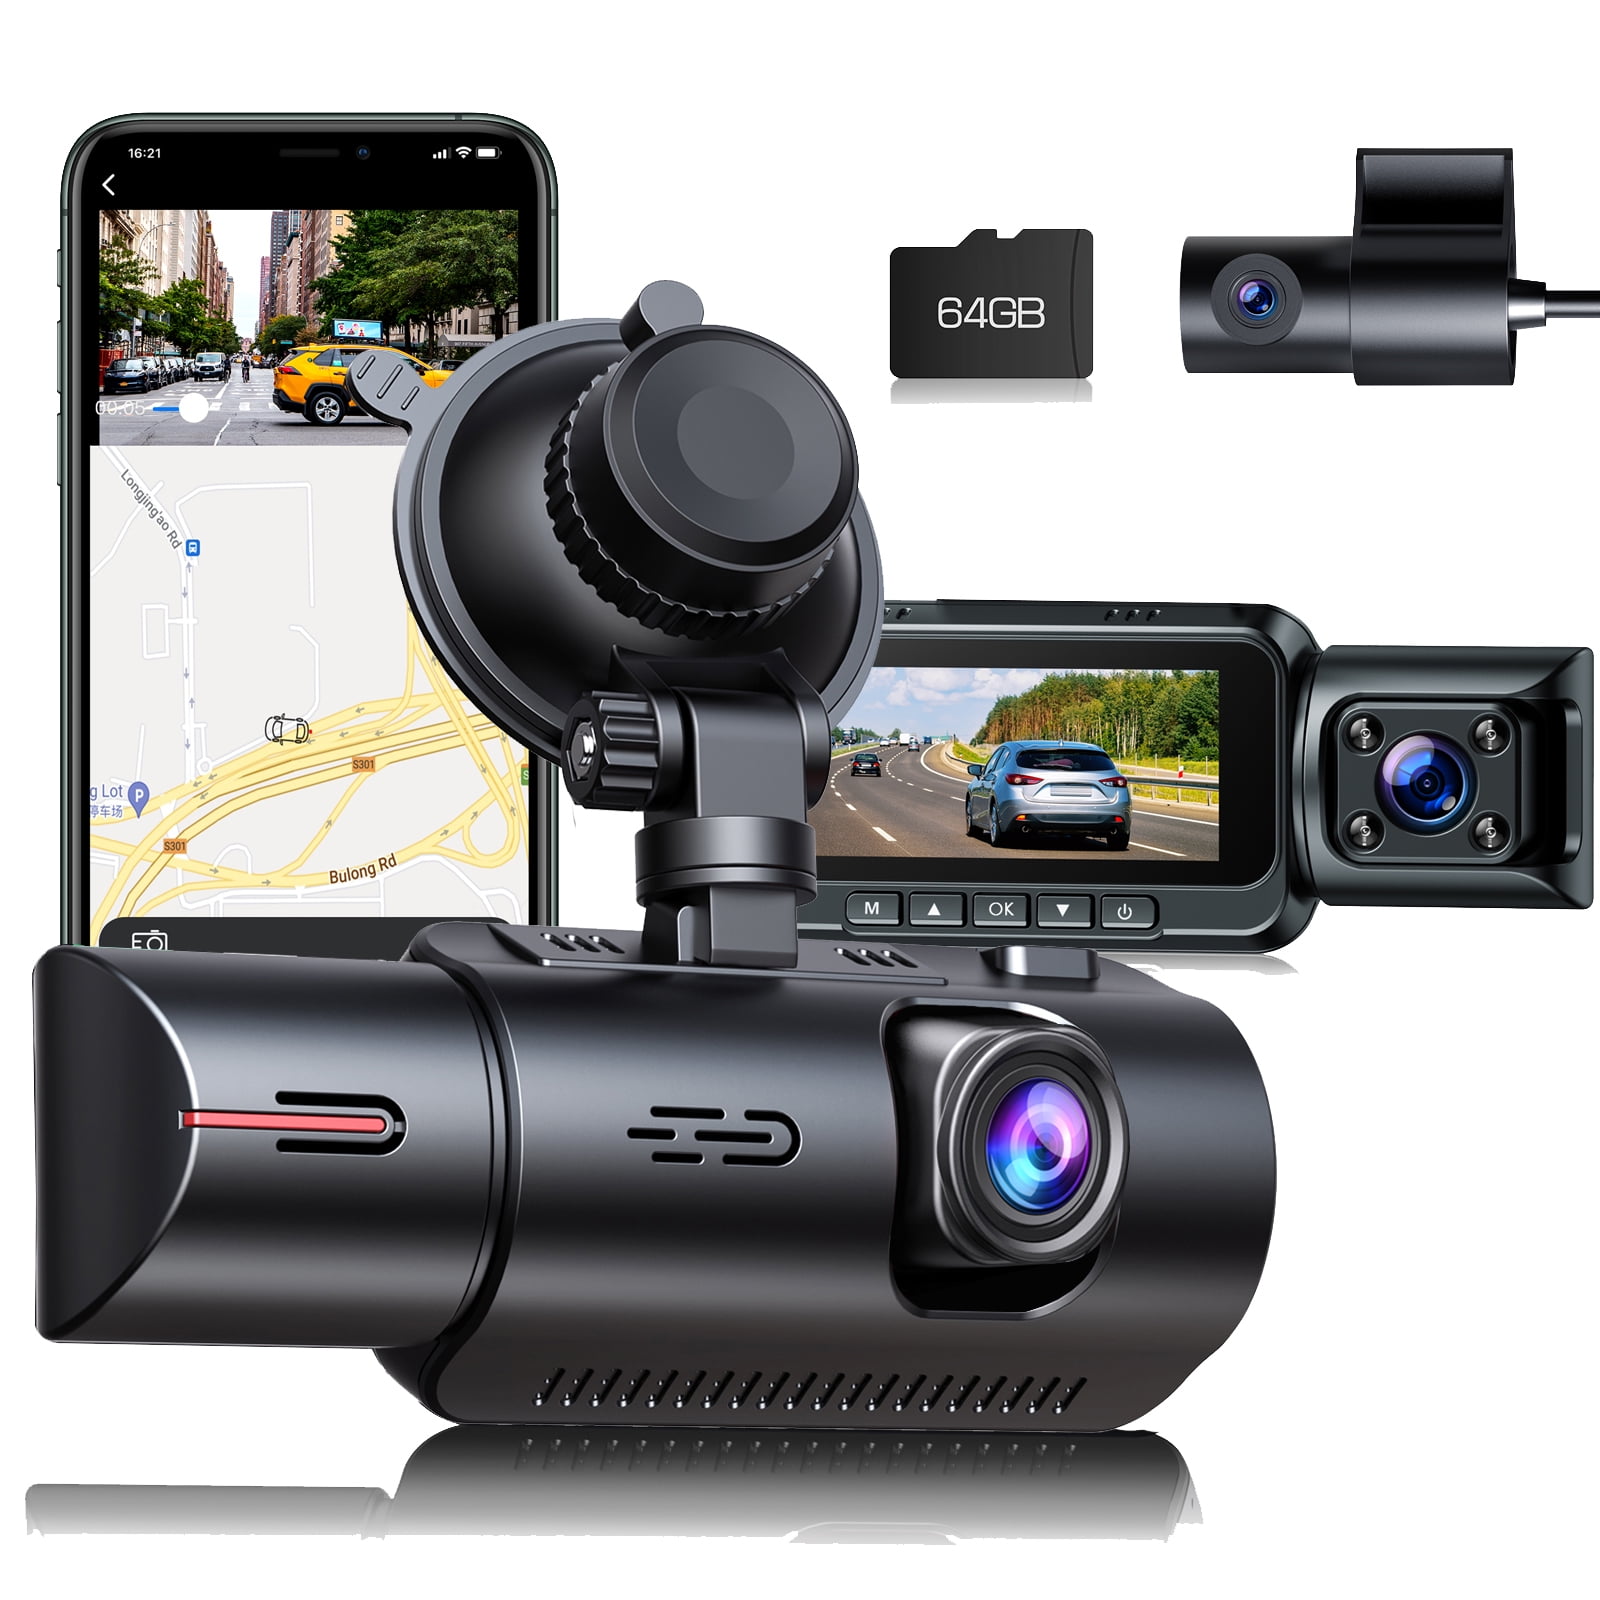 TOGUARD 3 Channel Dash Cam Front and Rear Insidewith 64GB U3 SD